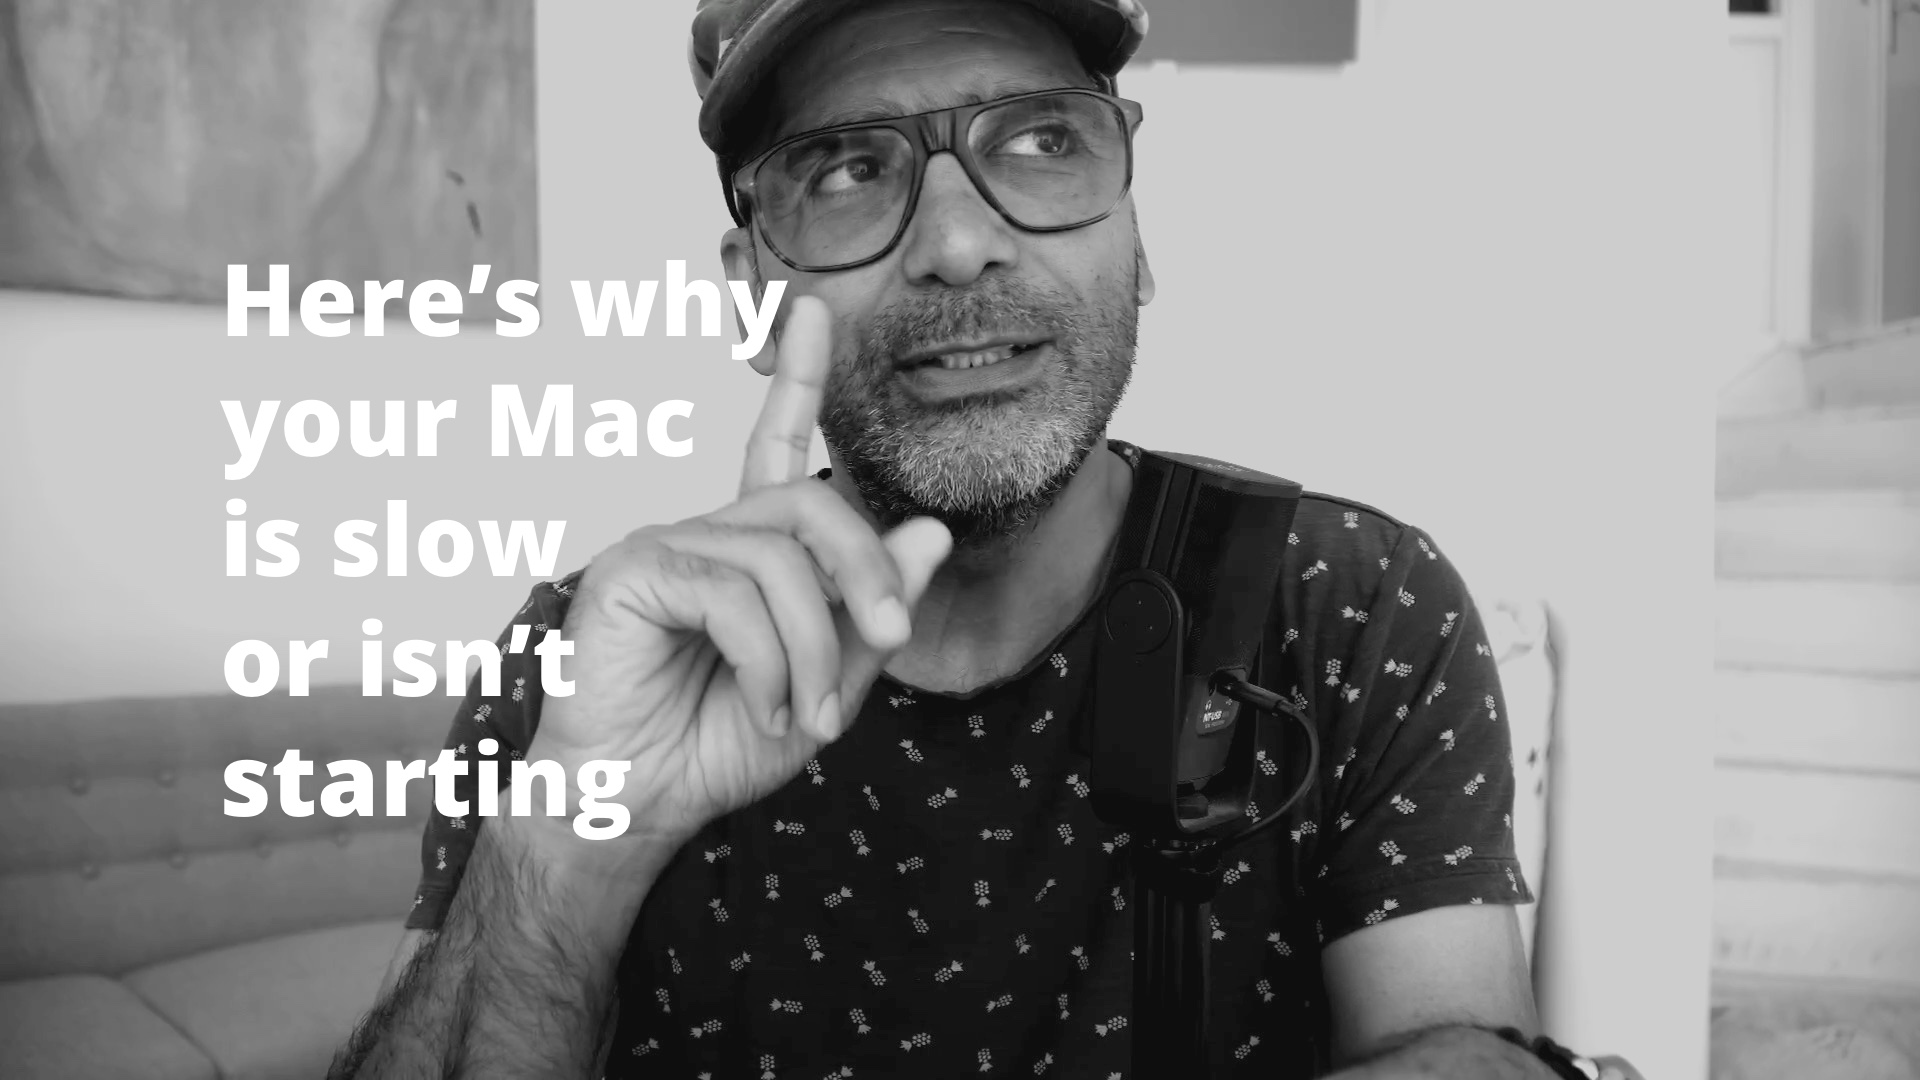 Here’s why your Mac is slow or isn’t starting